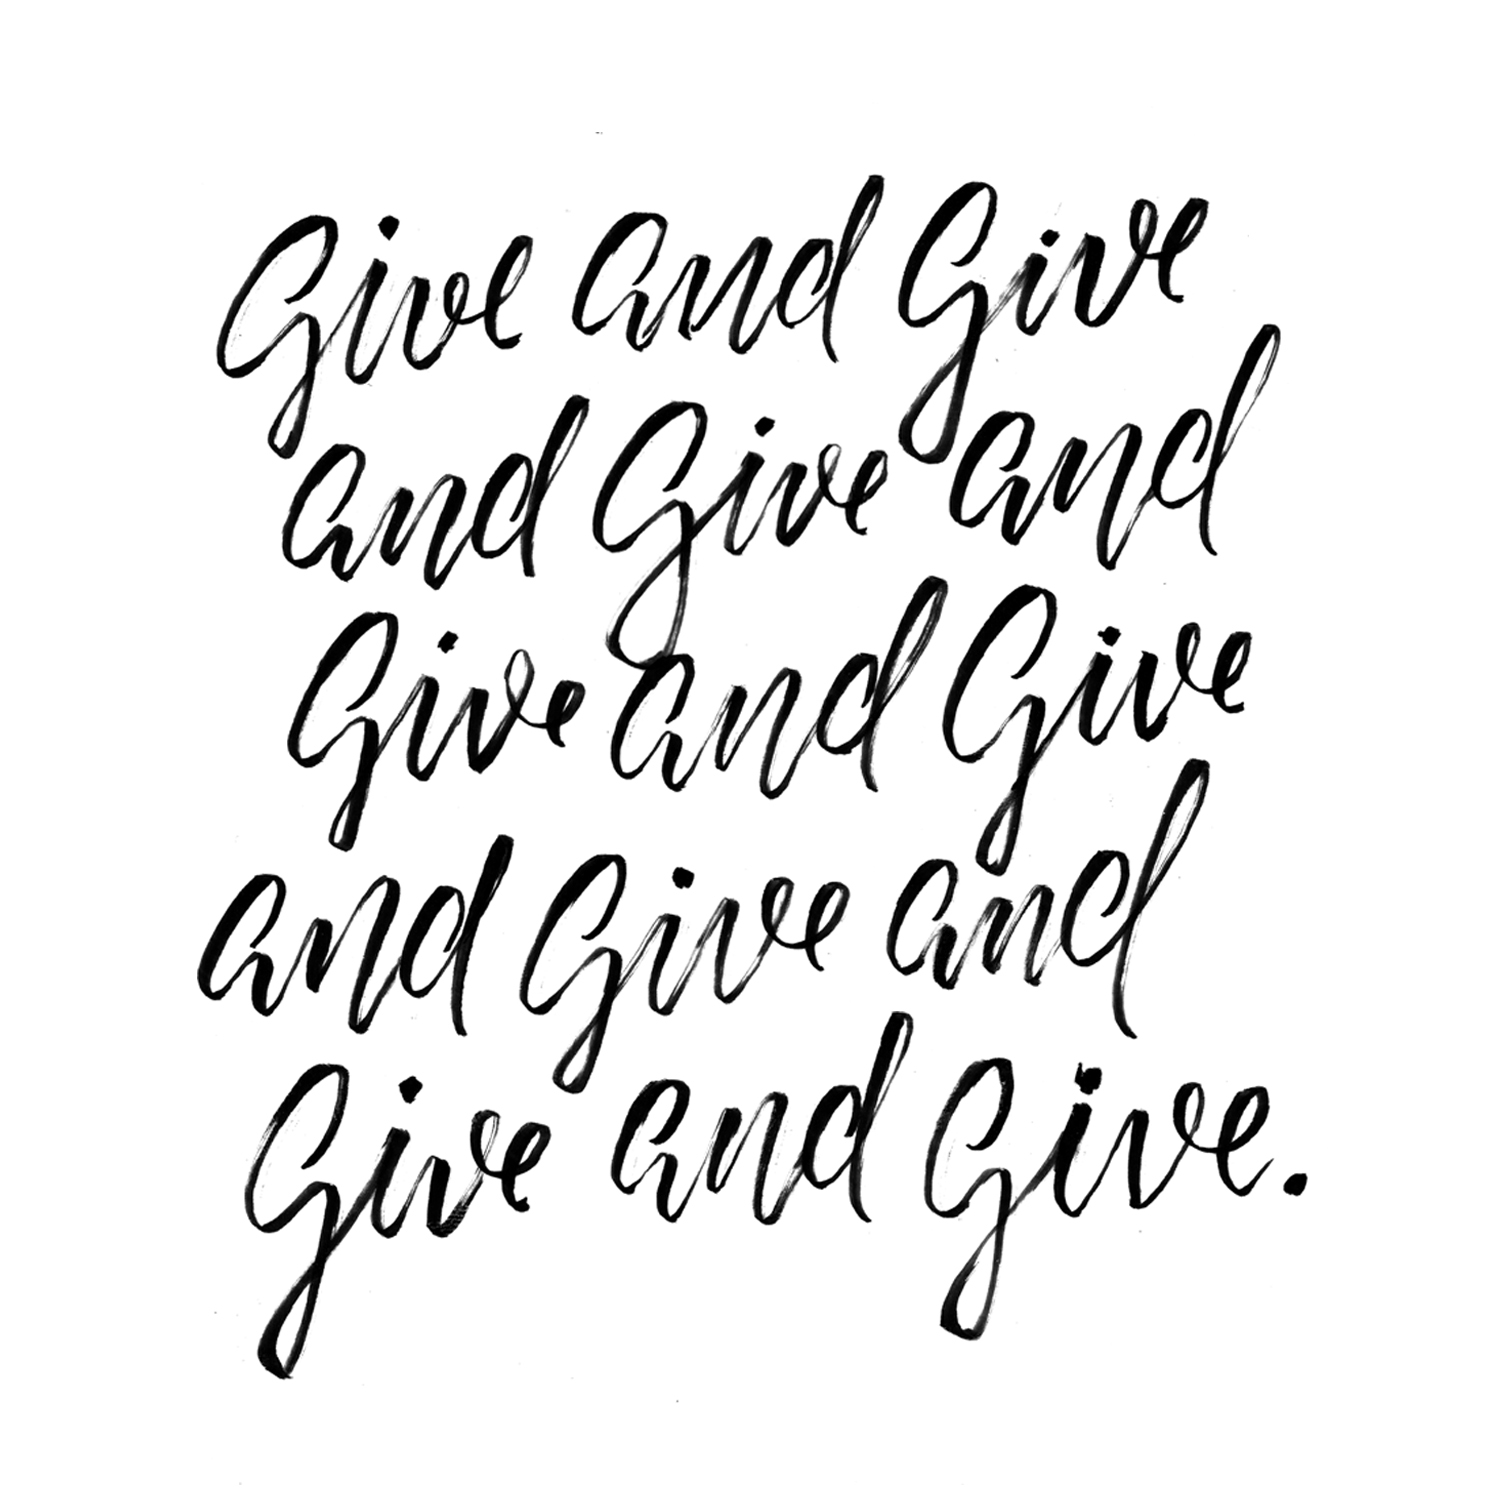 Give and give 10x10.jpg